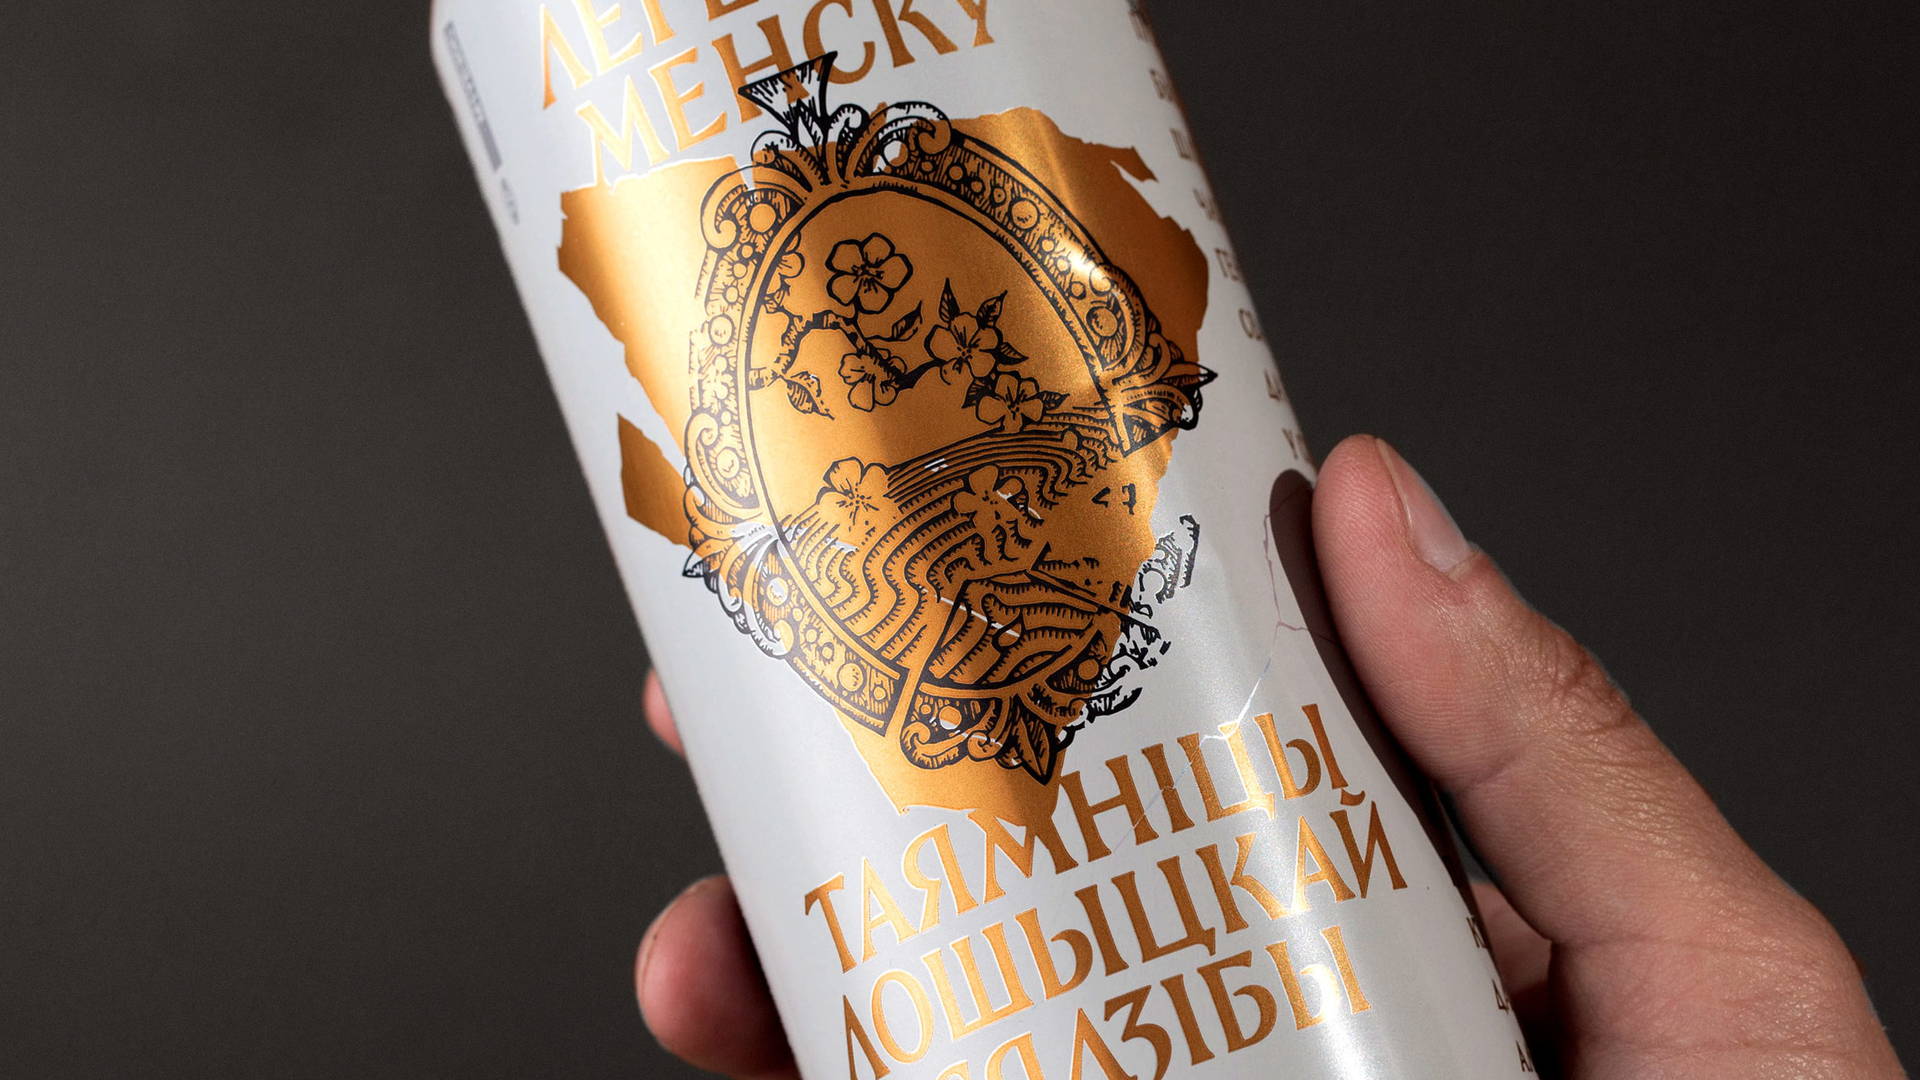 Featured image for This Beer Celebrates The Legends of Belarus